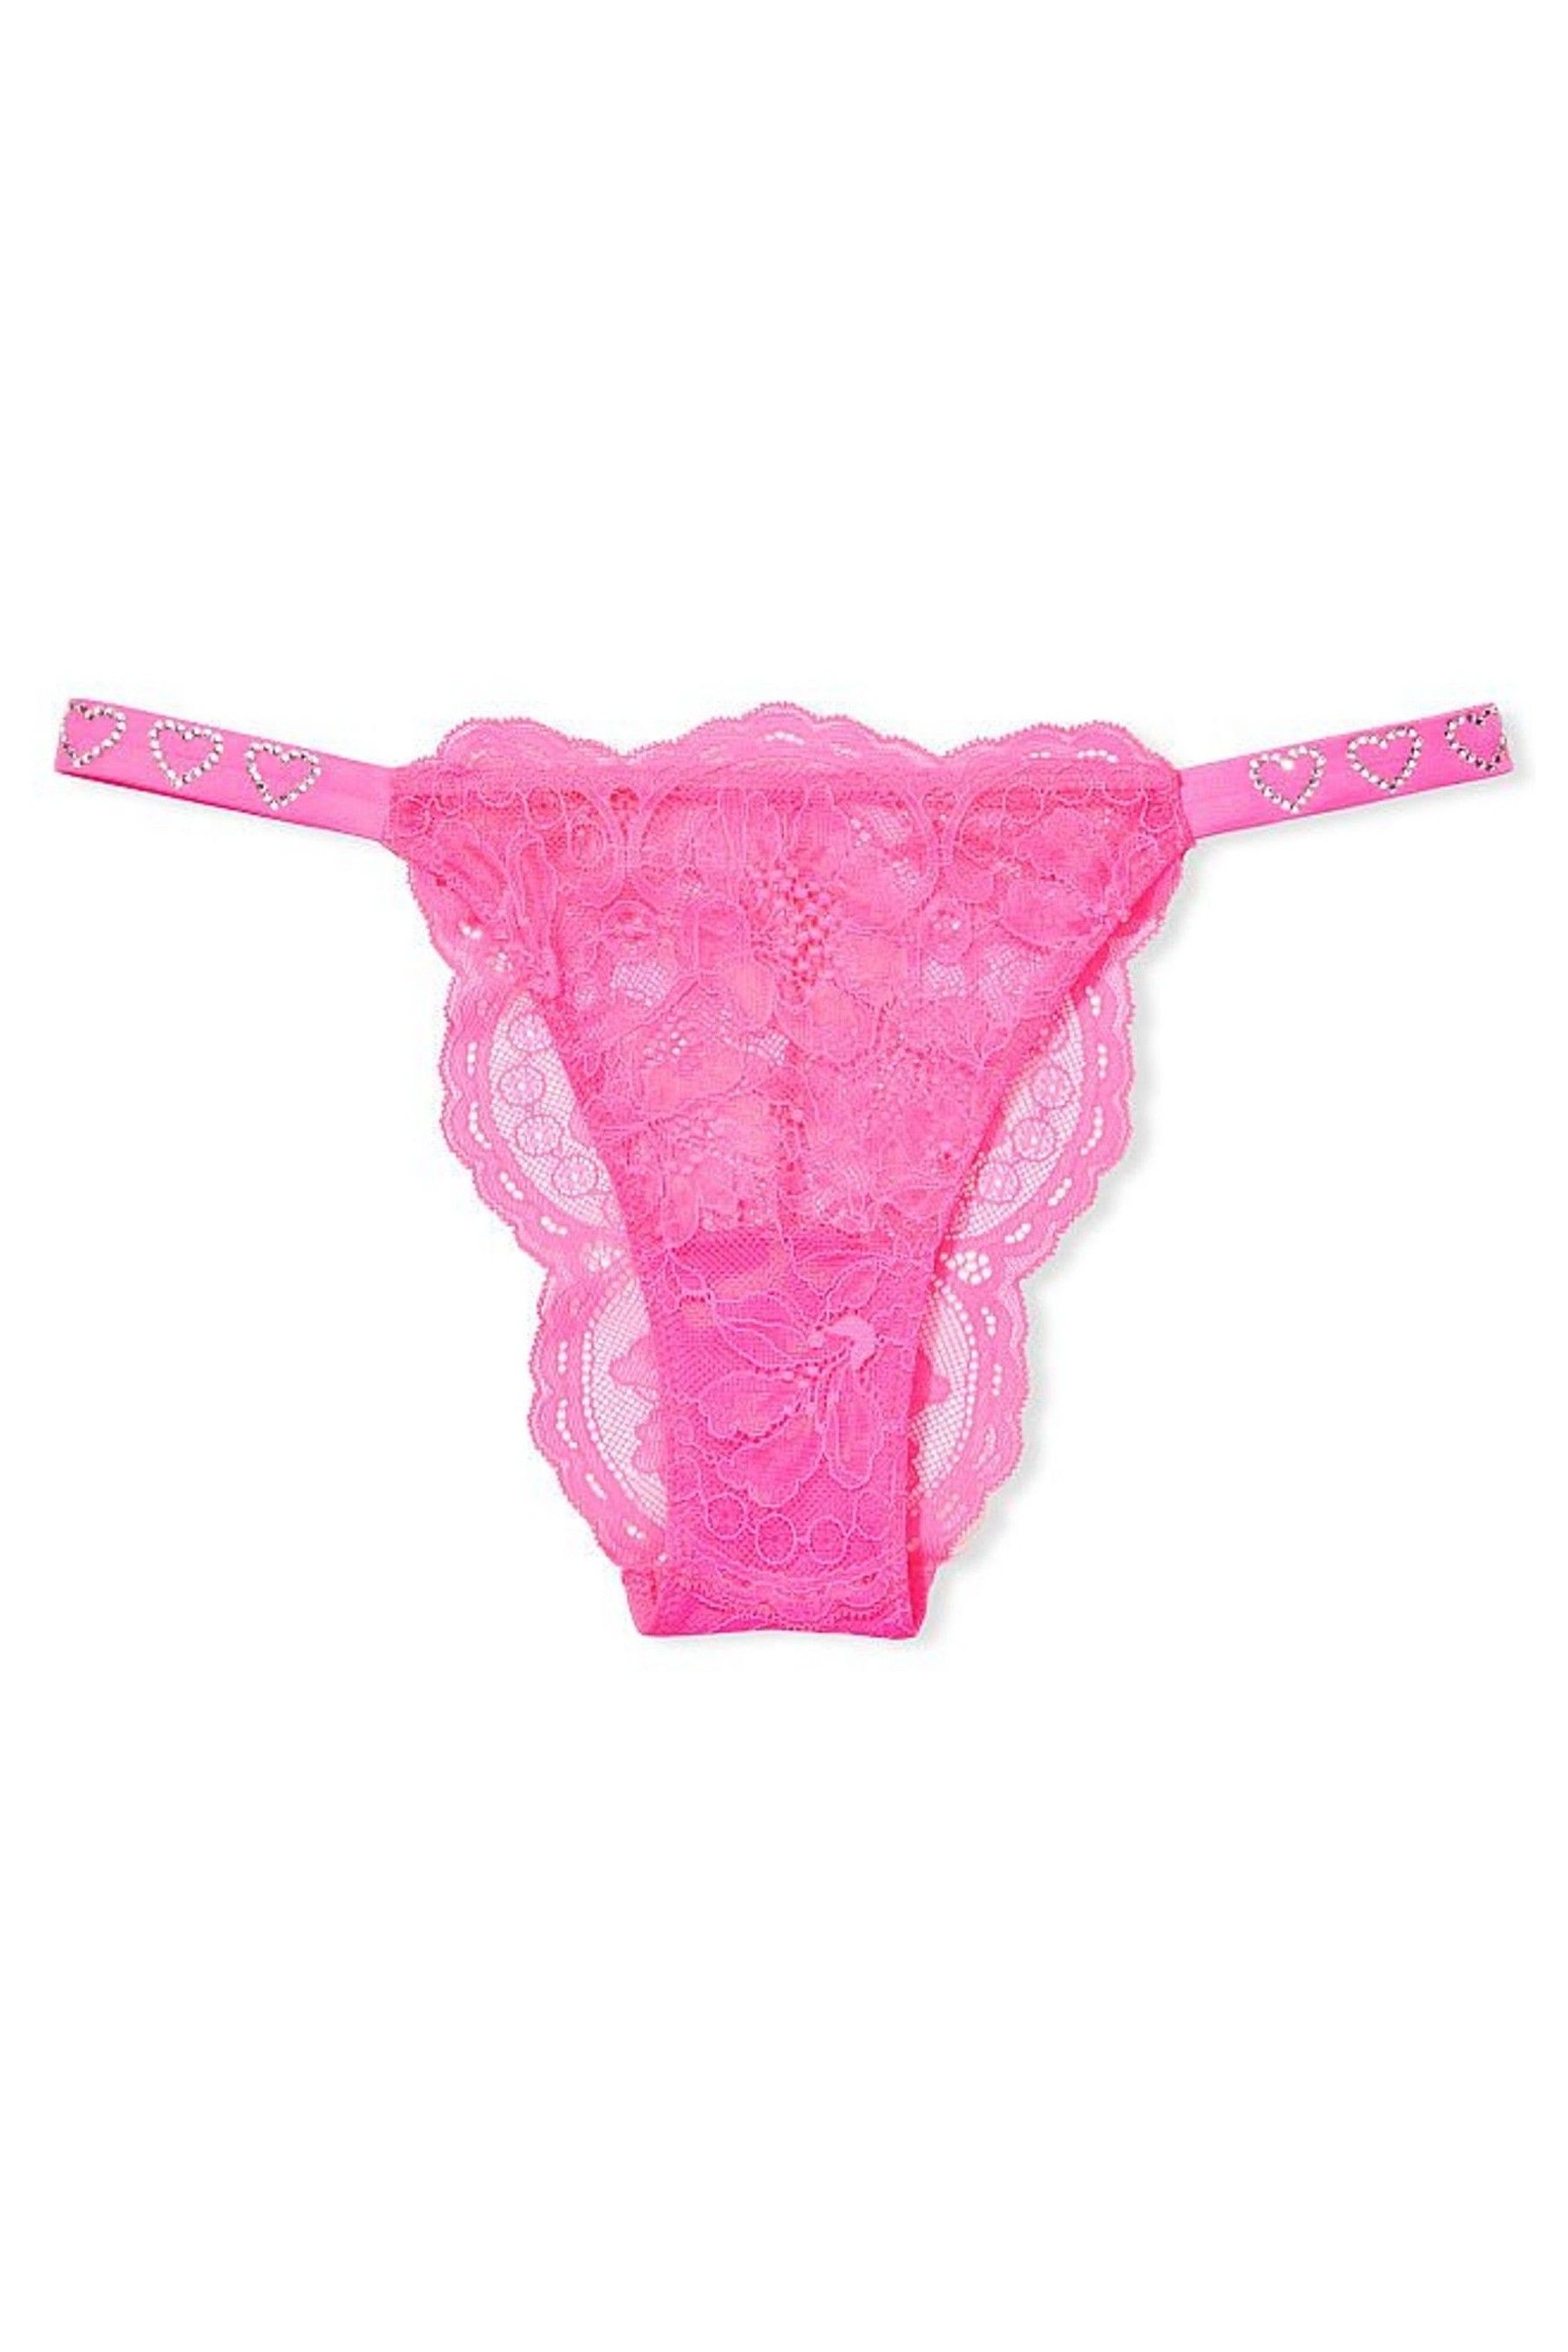 Buy Victorias Secret Smooth Shine Strap Brazilian Panty From The